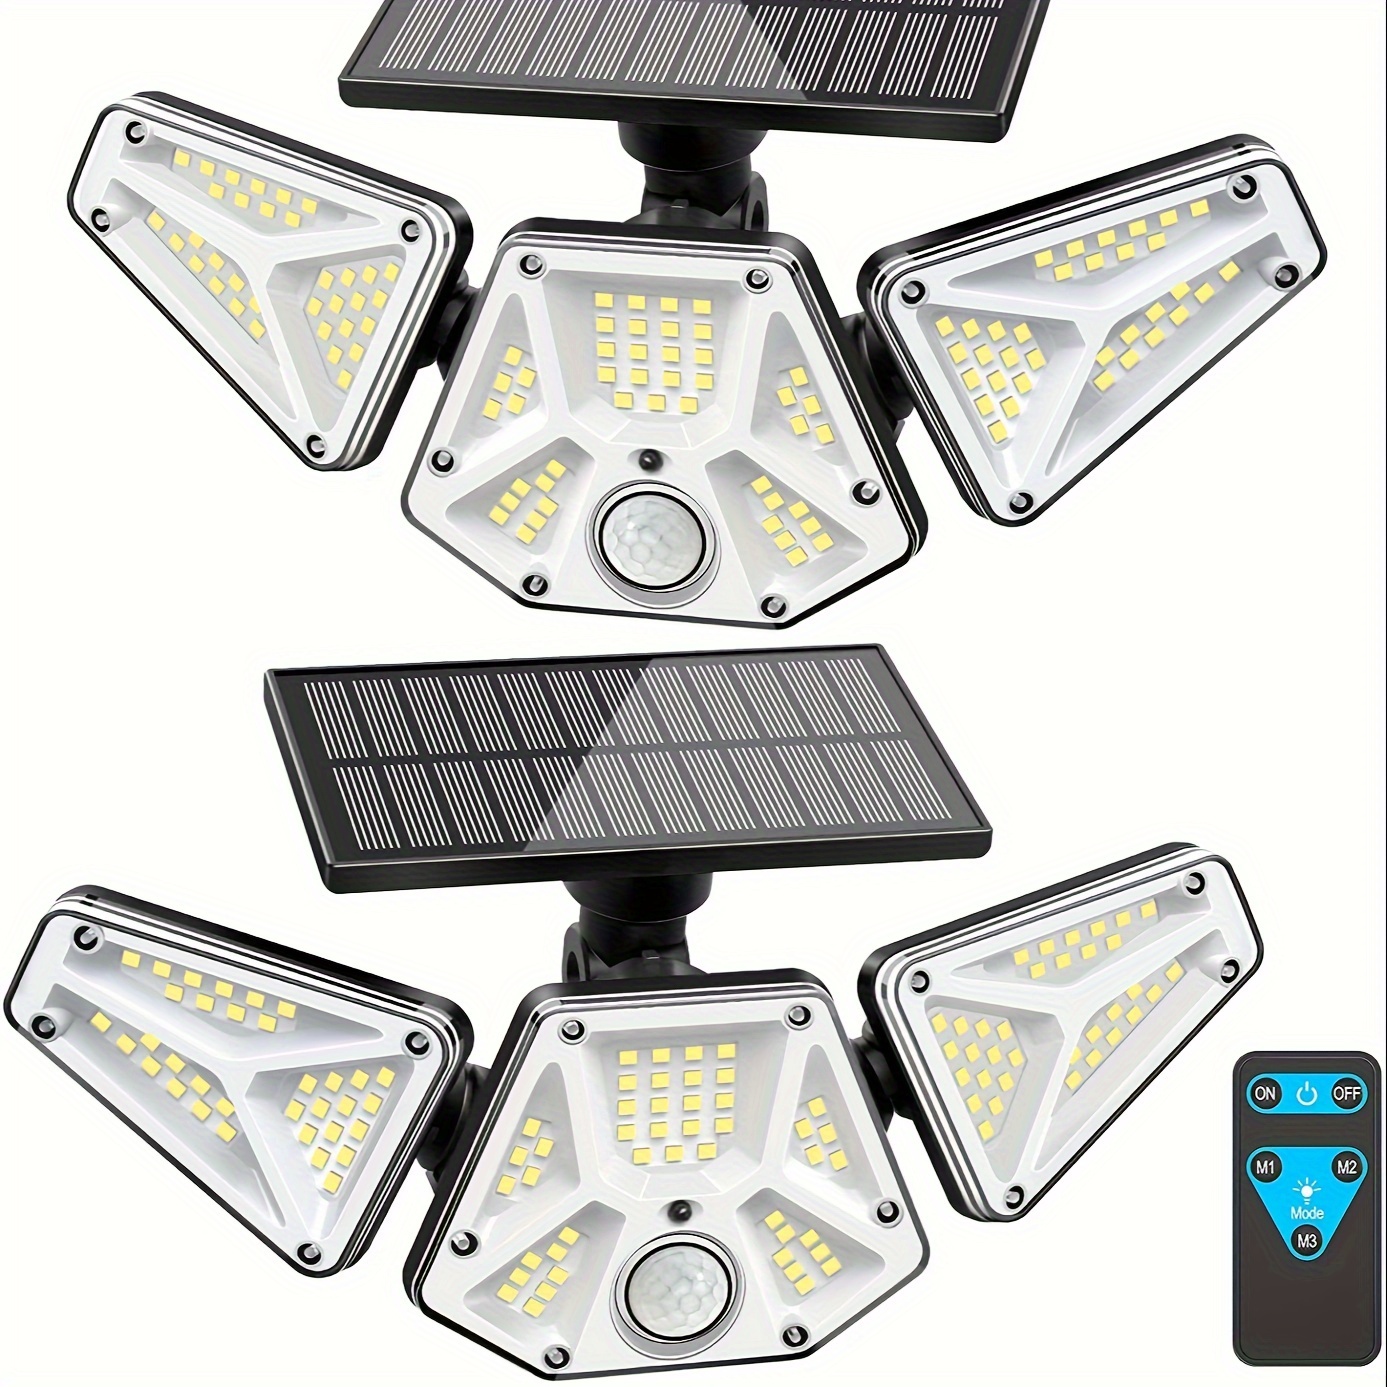 

Solar Outdoor Lights, 2pack Motion Sensor Flood Security Light With Remote Control For Outside Garage Yard